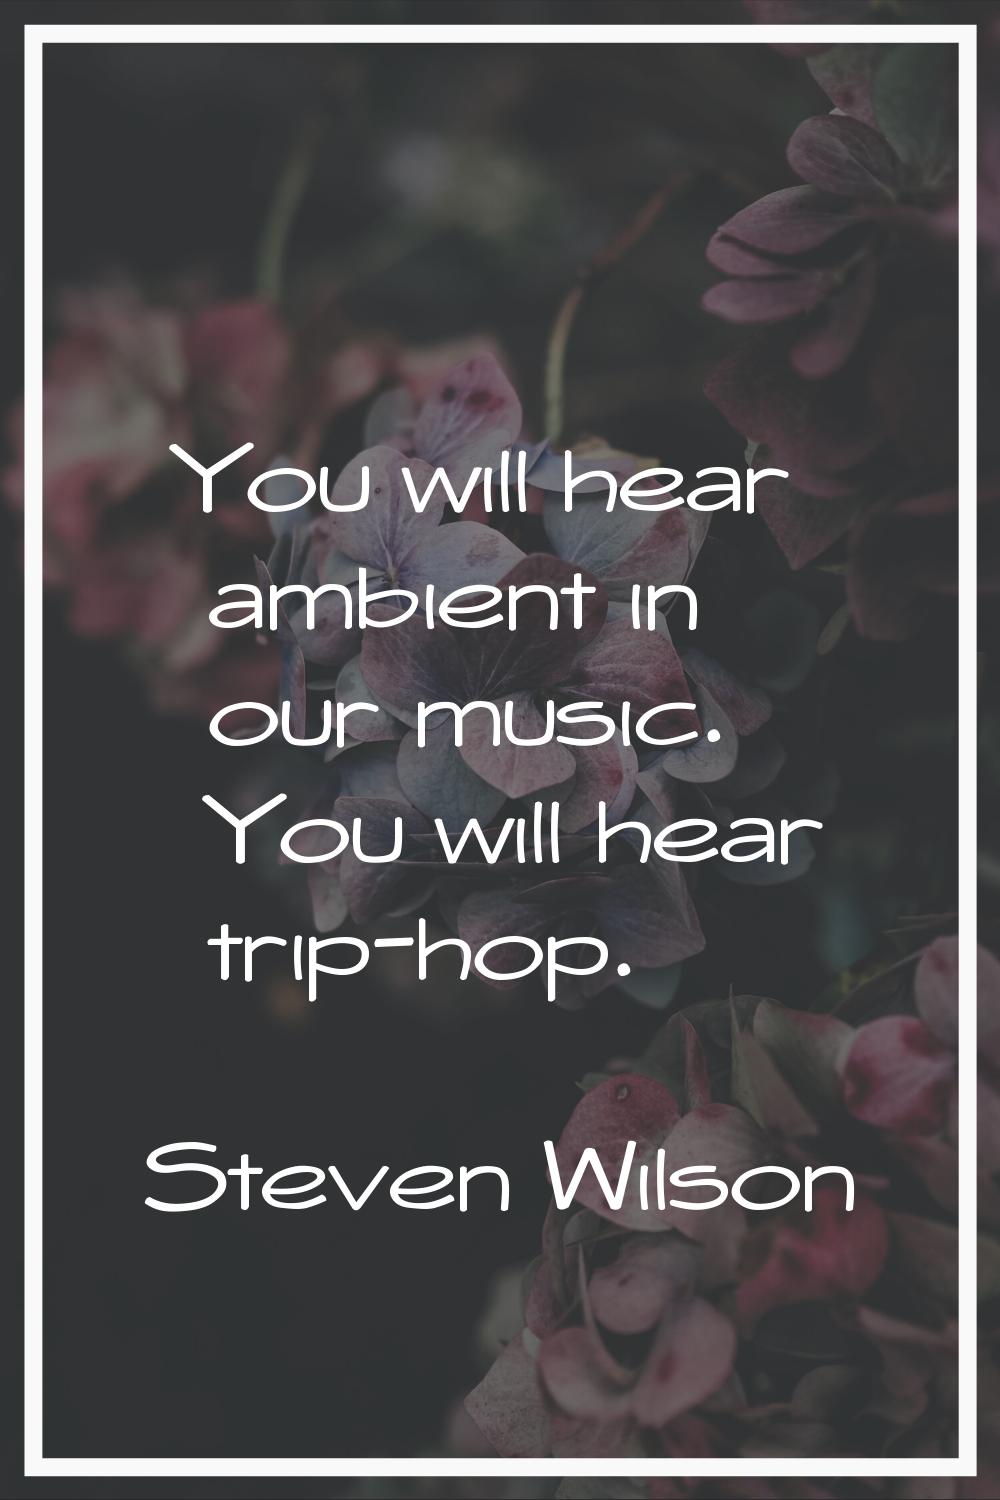 You will hear ambient in our music. You will hear trip-hop.